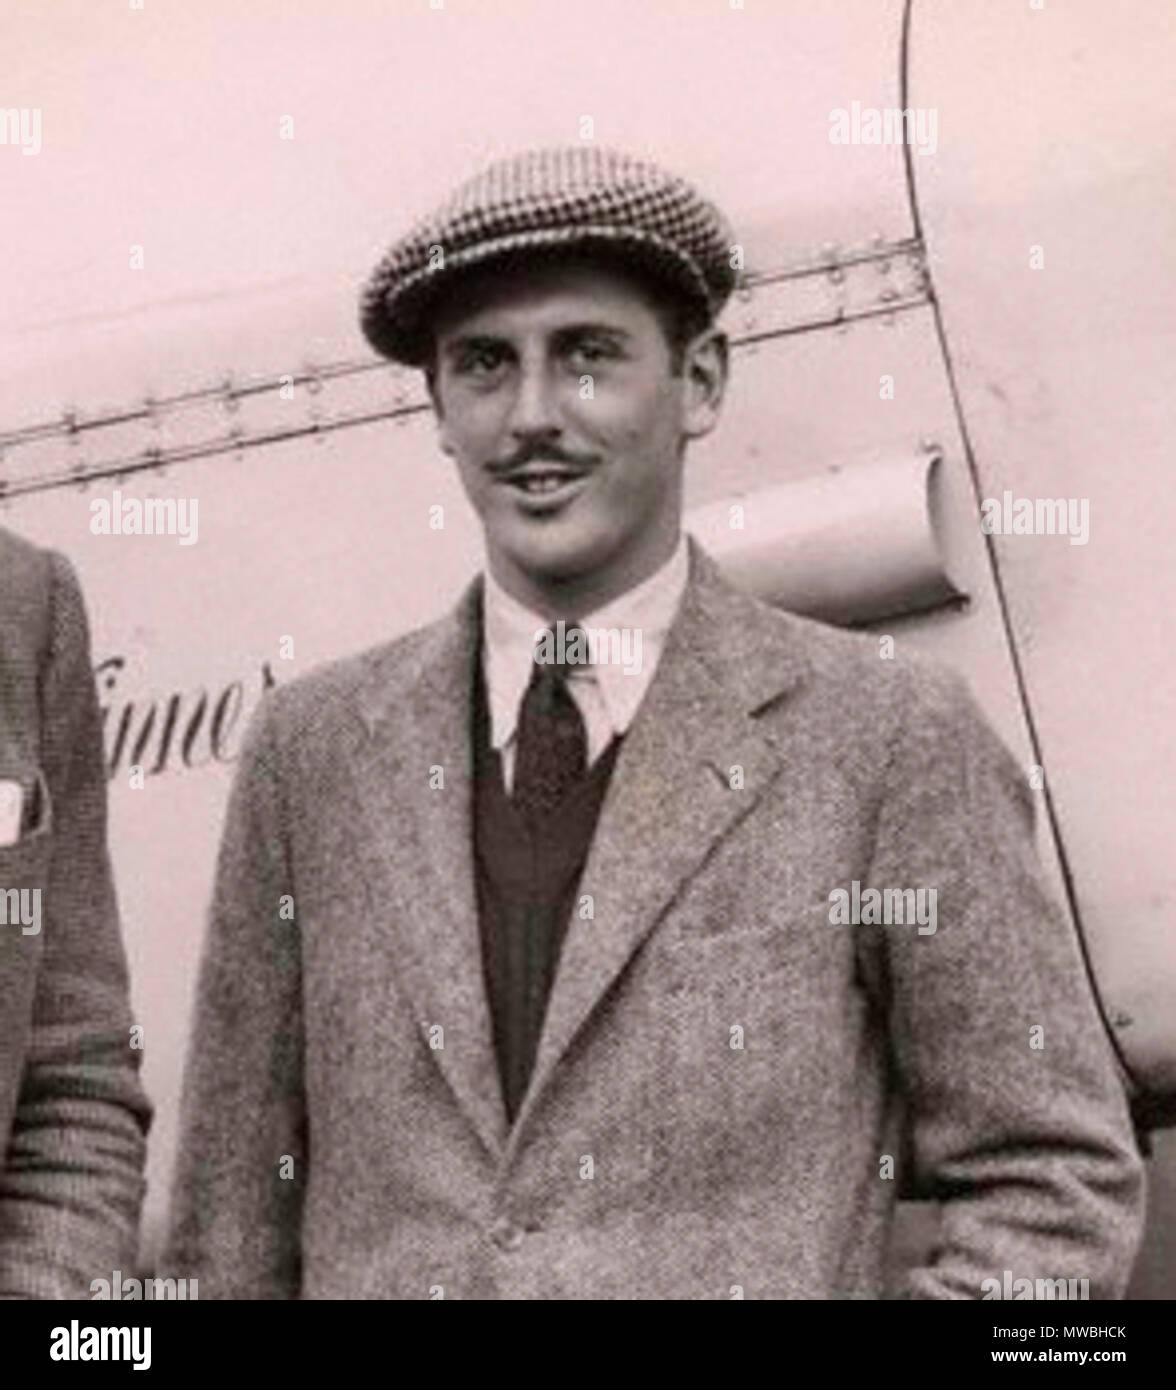 . English: Giles Guthrie, standing in front of the Percival Vega Gull G-AEKE in which they won the Schlesinger Air Race. September 1936. punlished by Planet News in 1936 unknown author 243 Giles Guthrie 1936 Stock Photo